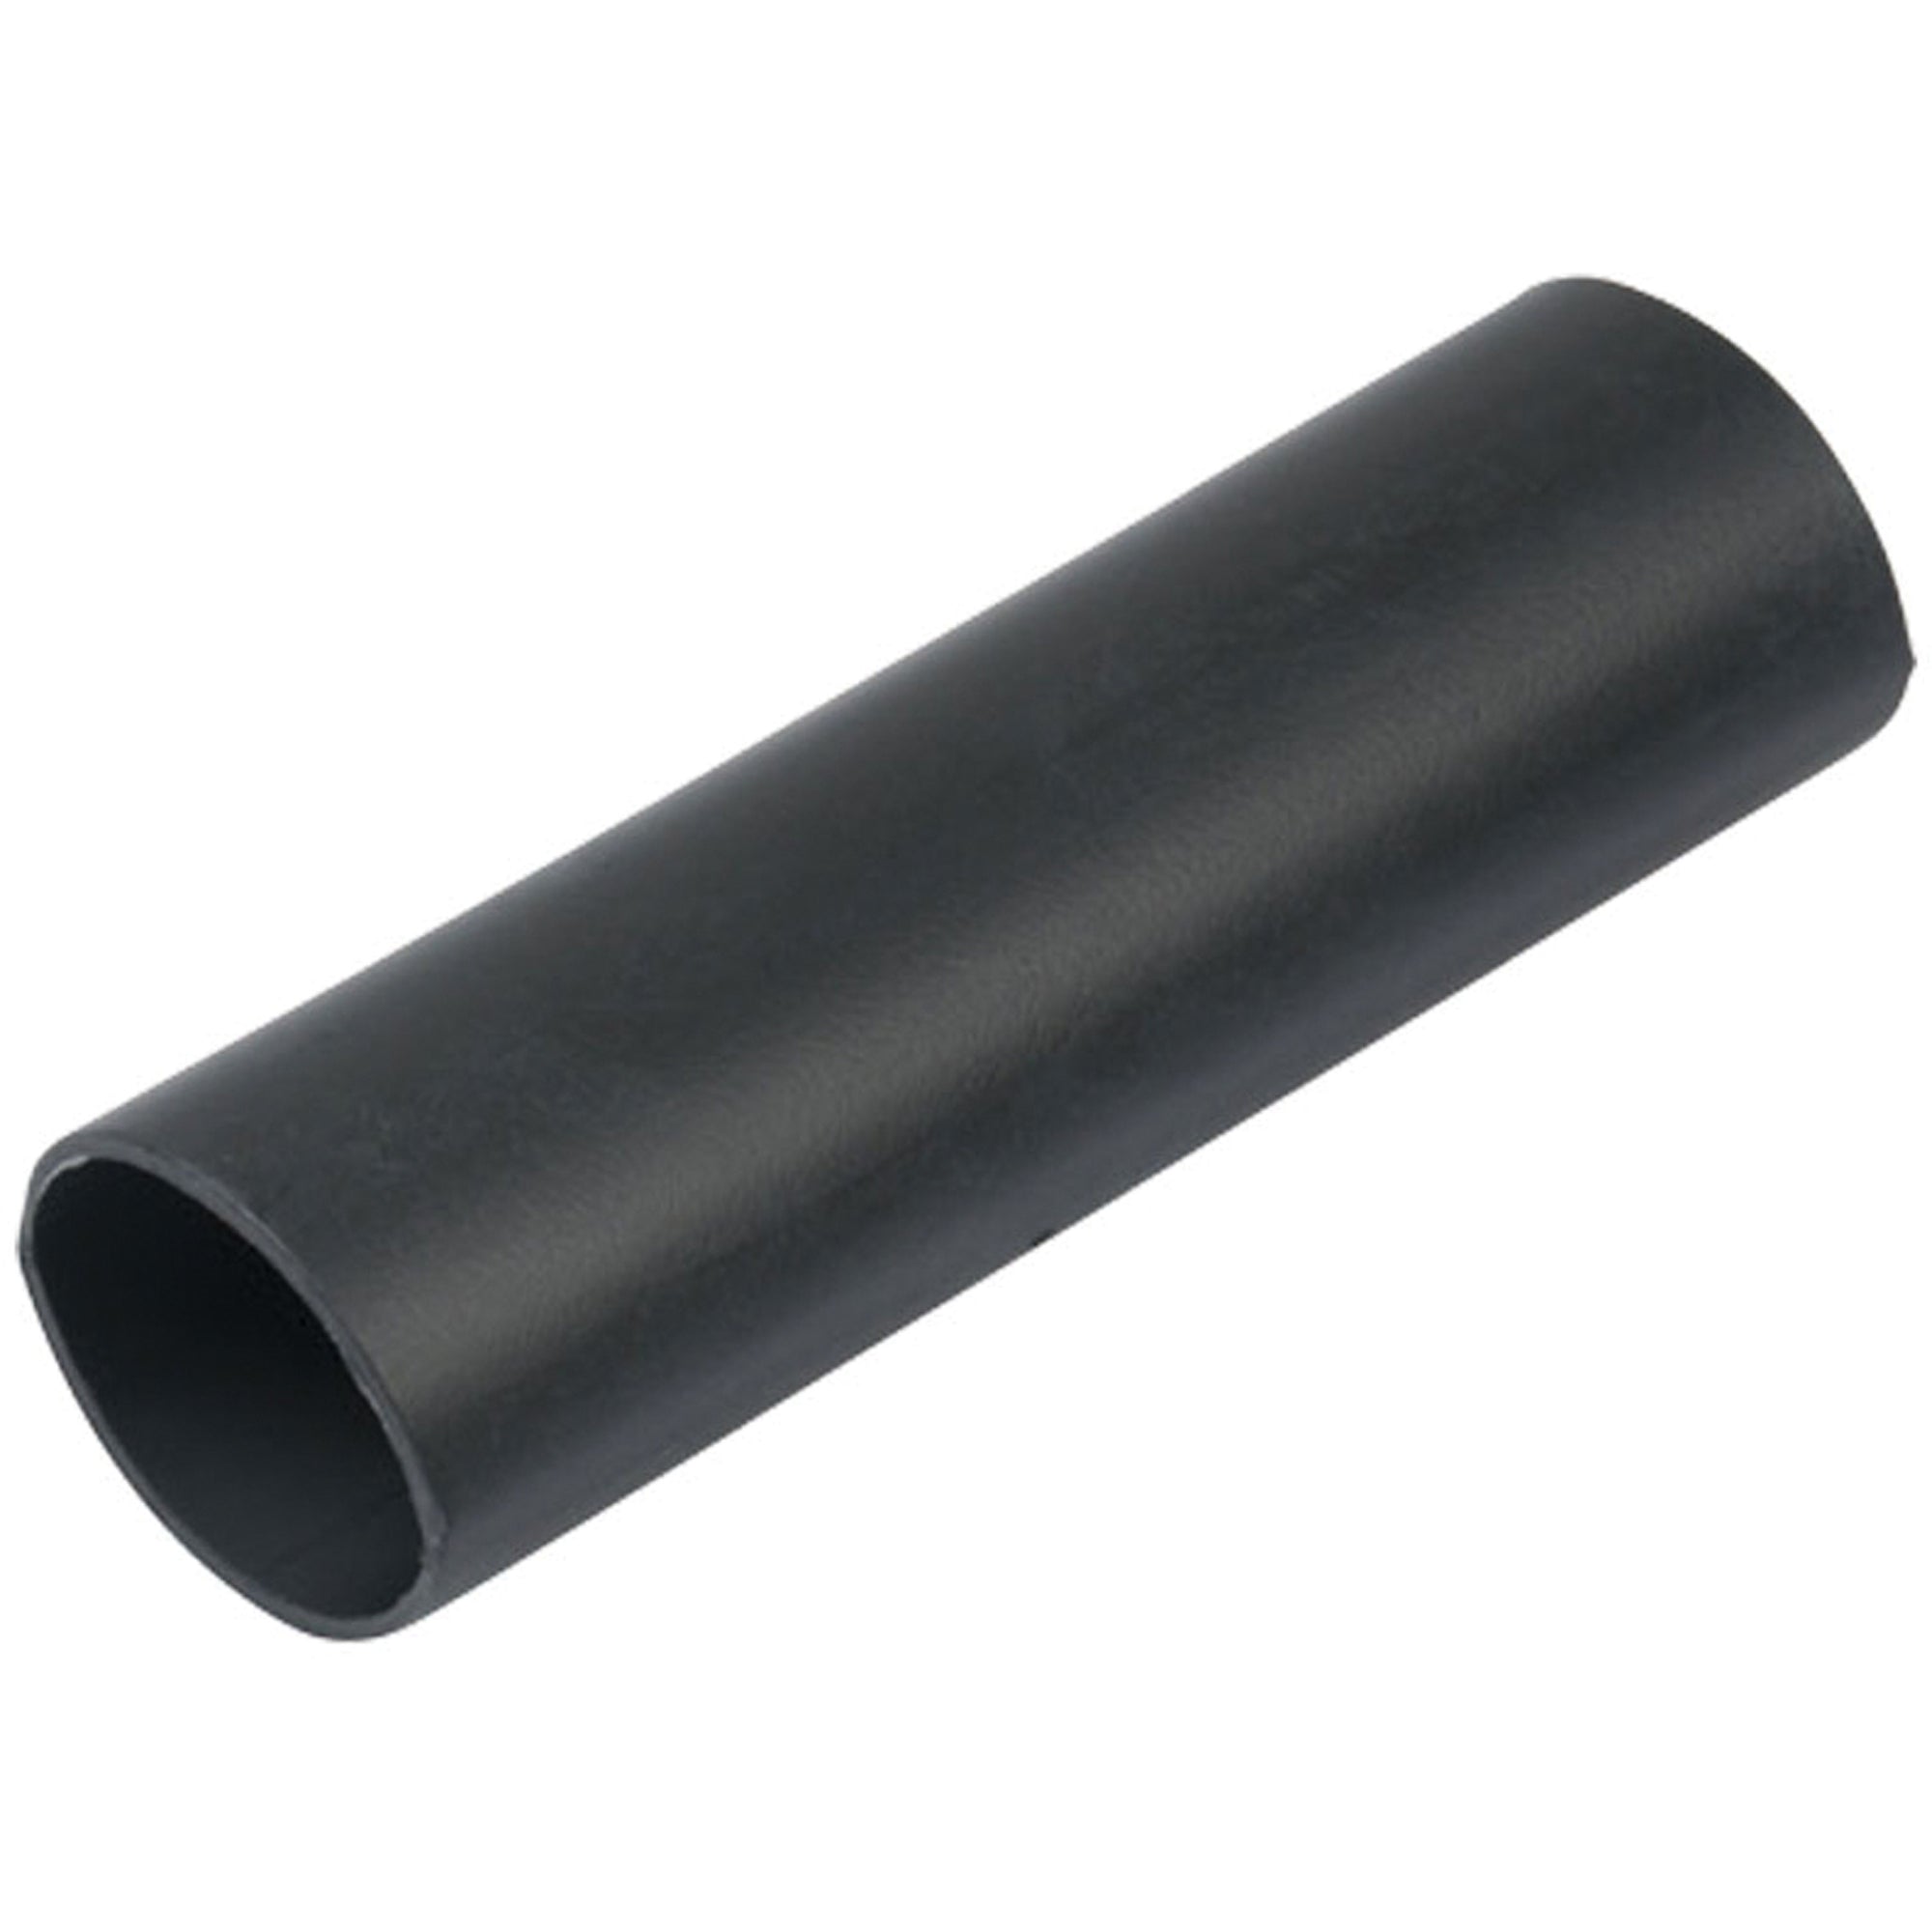 Ancor 326148 Adhesive-Lined Heavy-Wall Battery Cable Tubing (BCT) - 3/4" x 48", Black